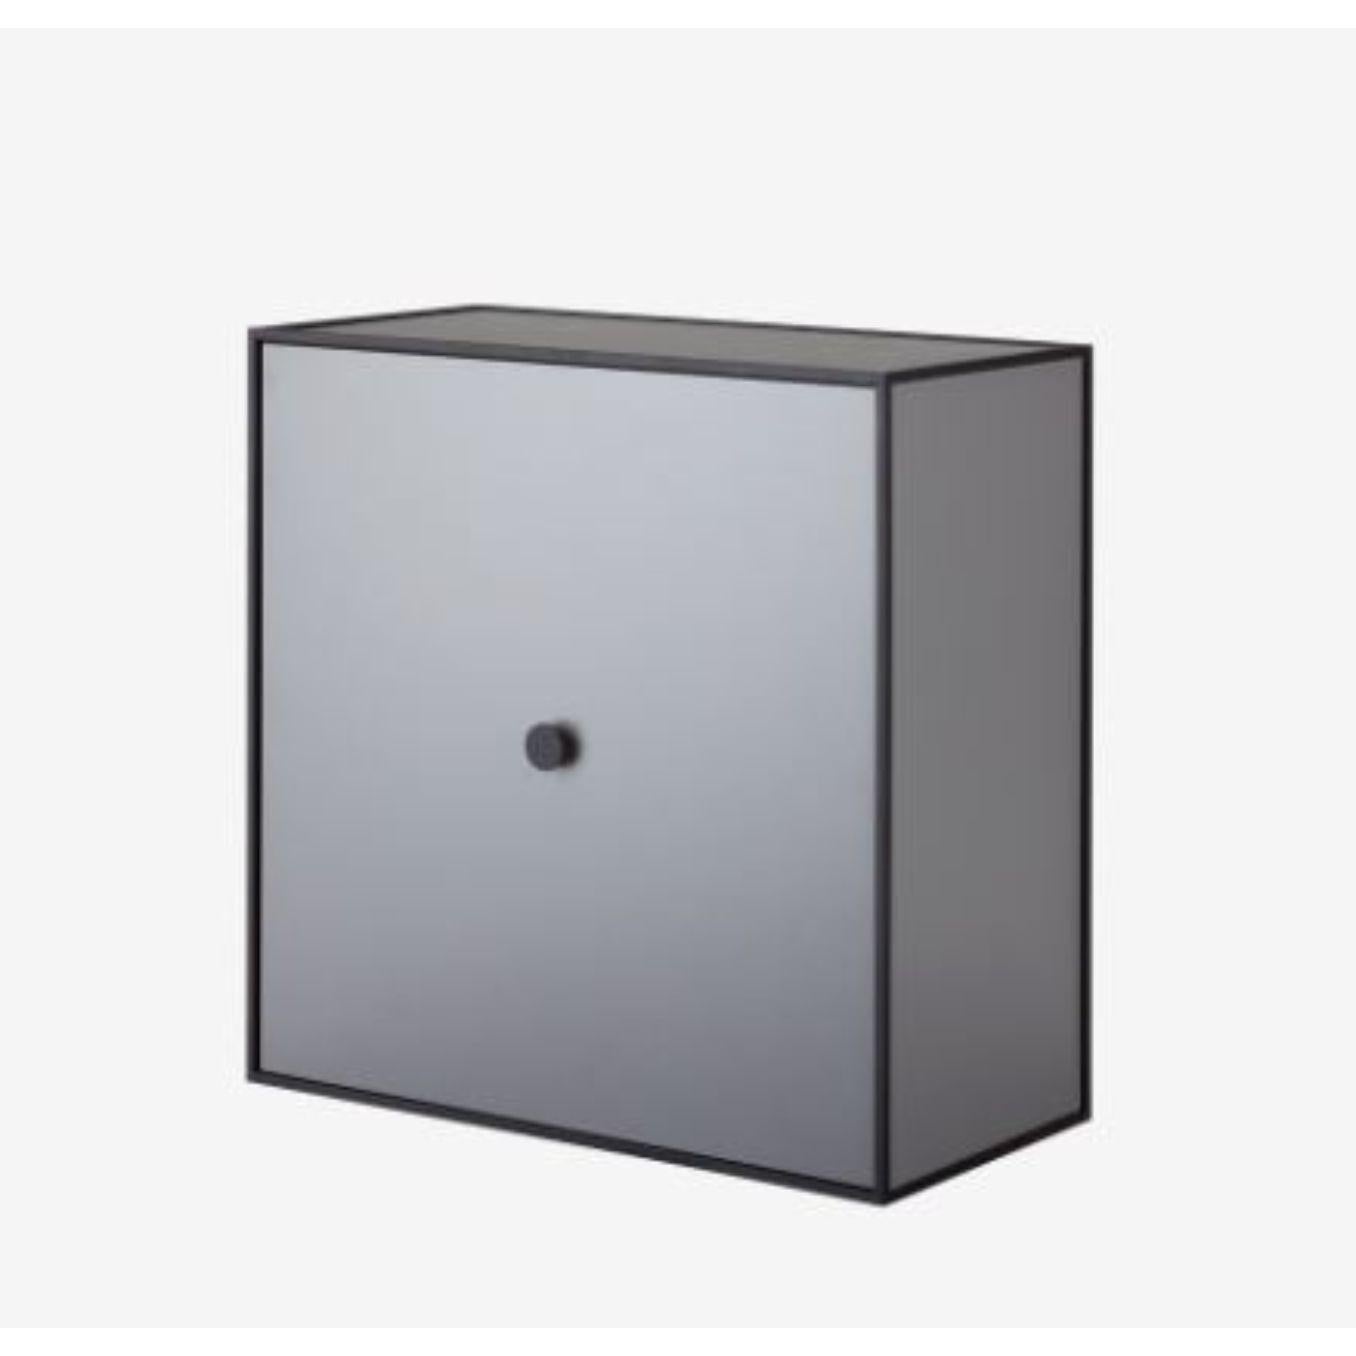 42 dark grey frame box with door by Lassen
Dimensions: D 42 x W 21 x H 42 cm 
Materials: Finér, Melamin, Melamin, Melamine, Metal, Veneer
Also available in different colors and dimensions. 
Weight: 11.50 Kg

By Lassen is a Danish design brand